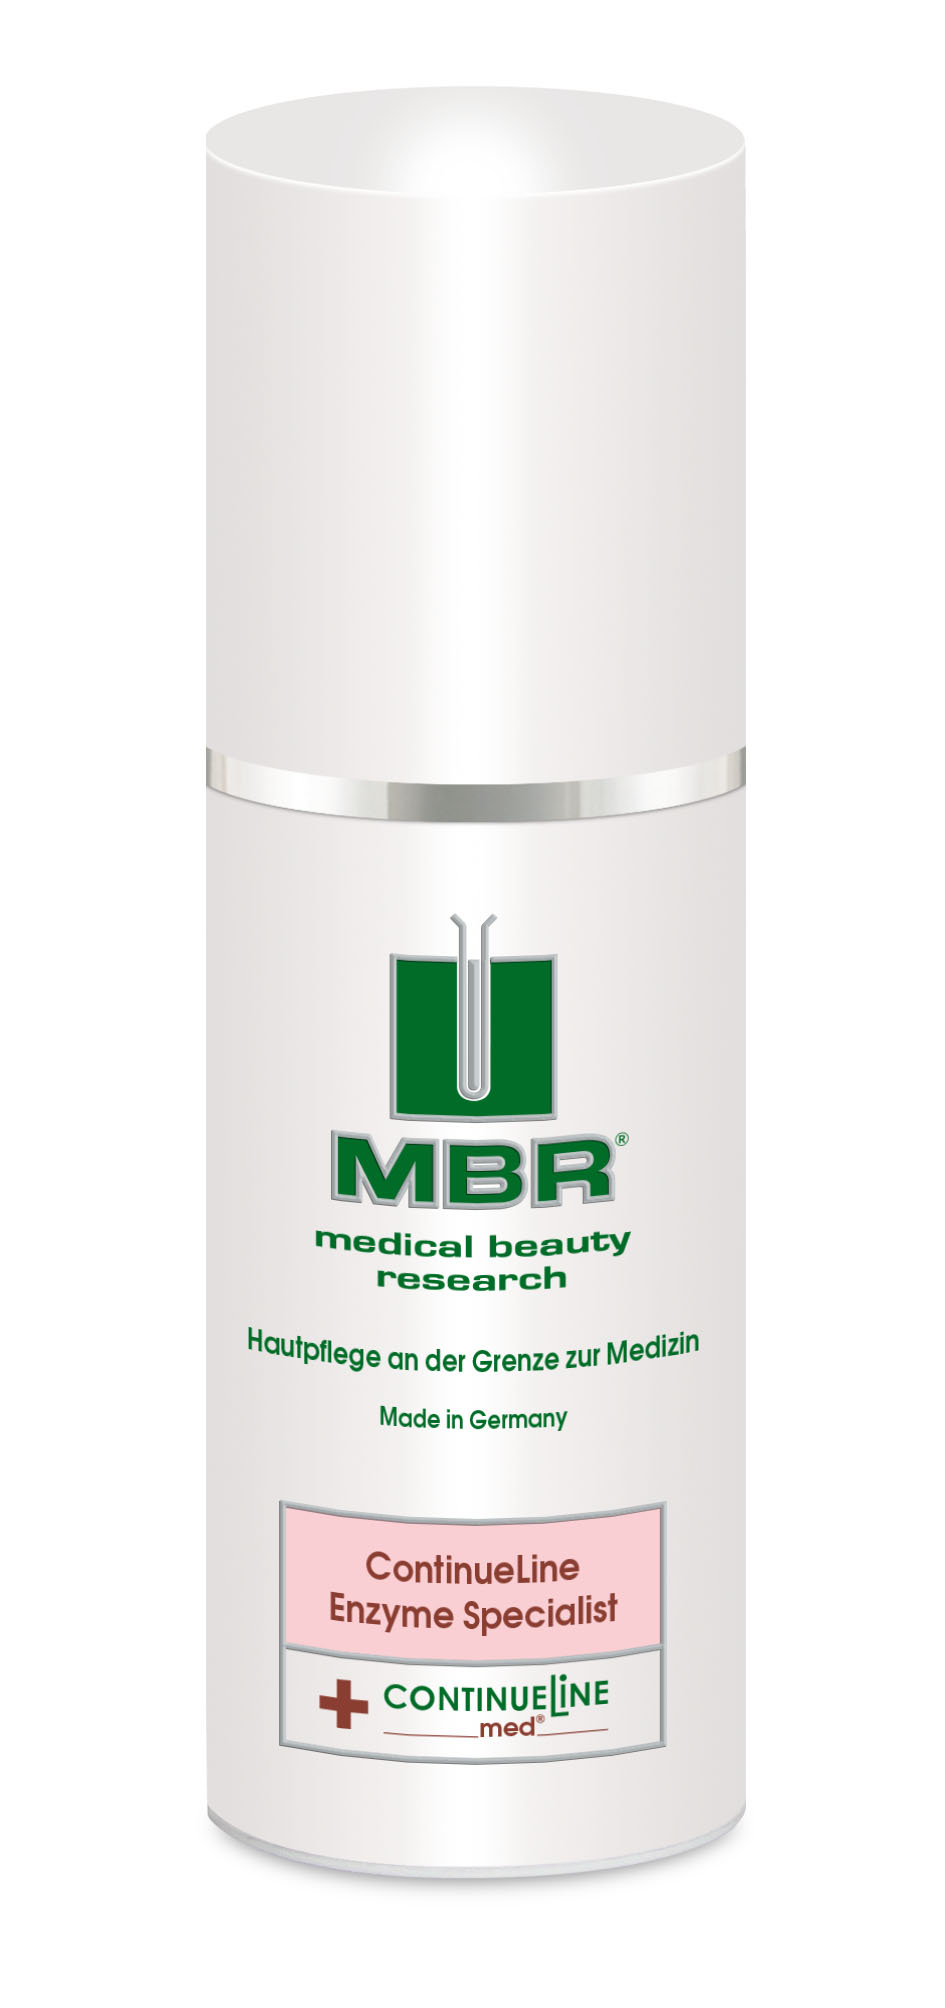 MBR Enzyme Specialist